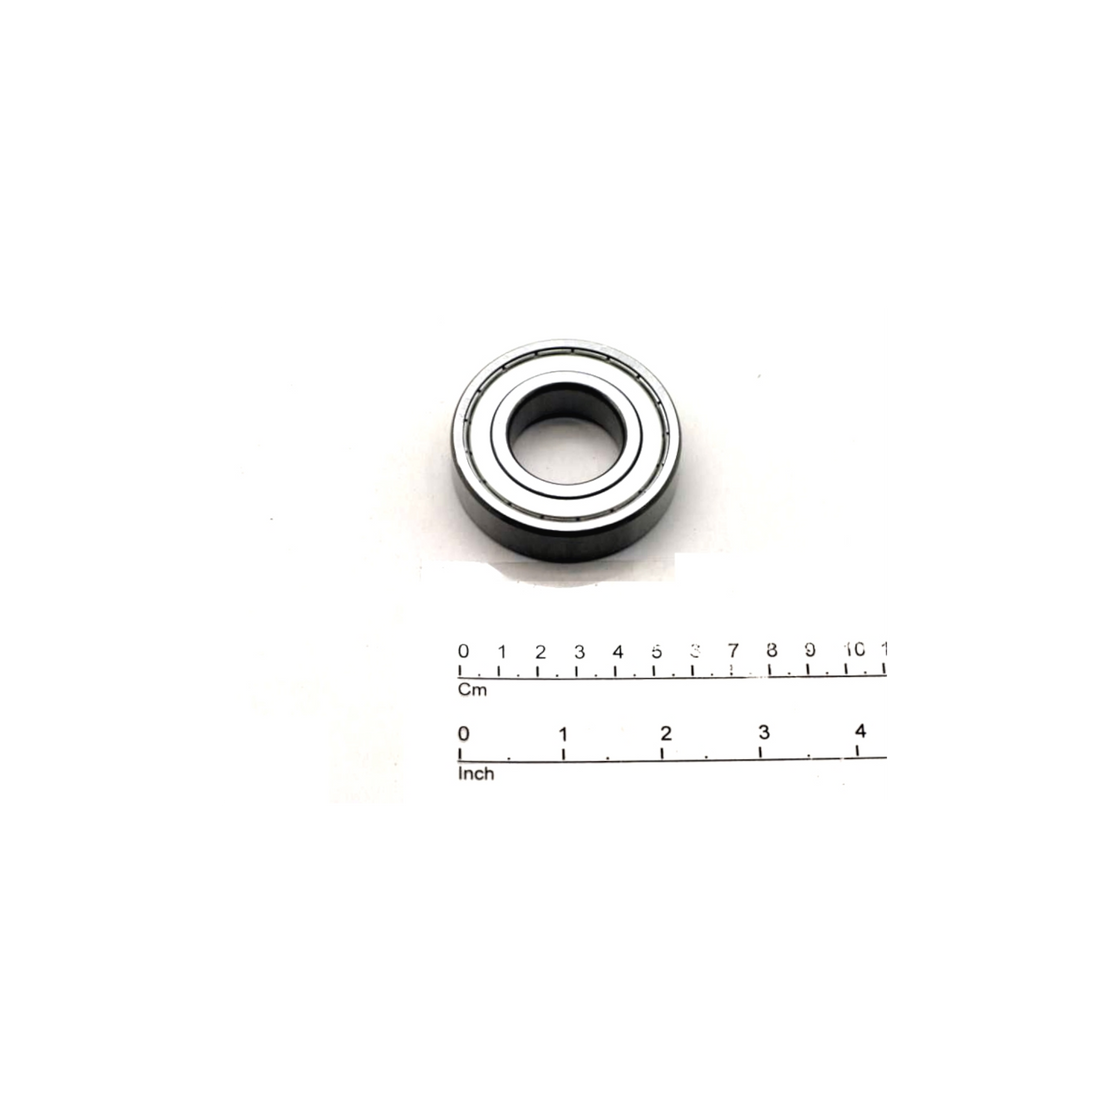 R&M Parts - Deep Groove Ball Bearing, Part Number: 52318387